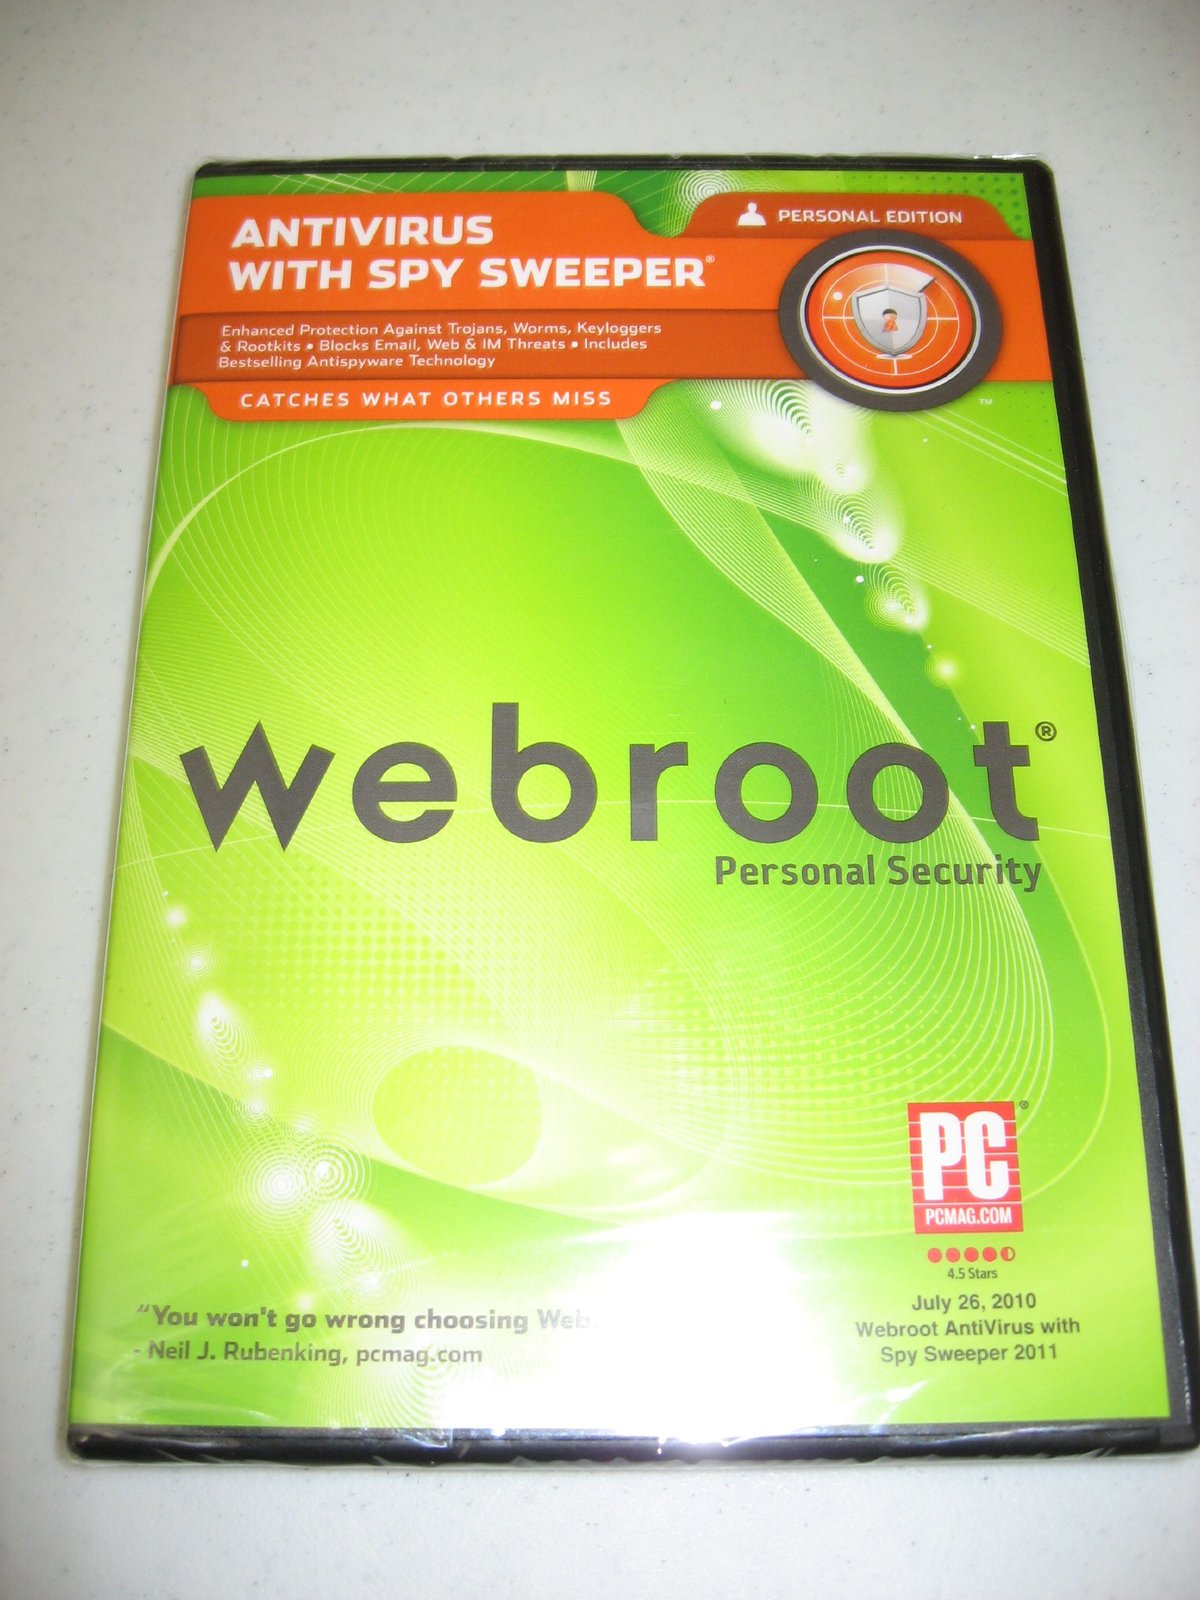 Webroot Antivirus with Spy Sweeper Personal Edition - $16.98